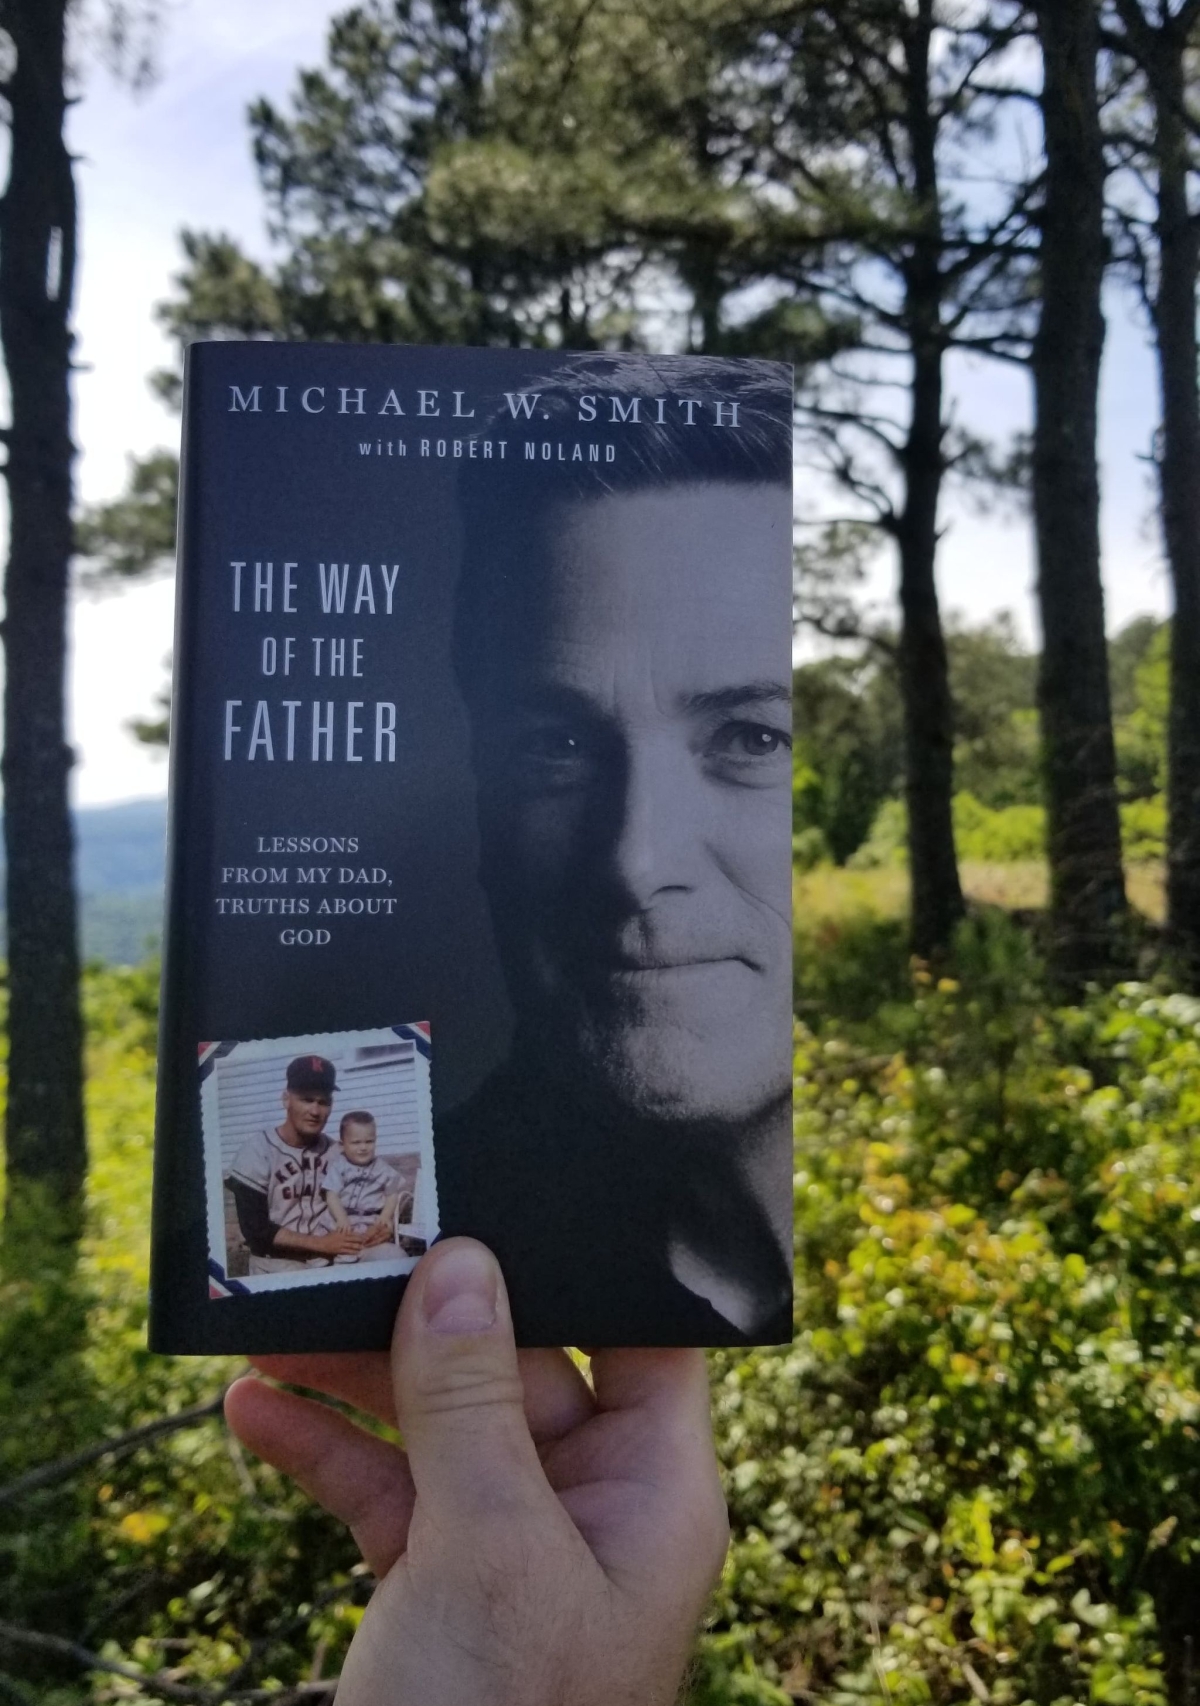 Michael W. Smith Shares “The Way Of The Father”